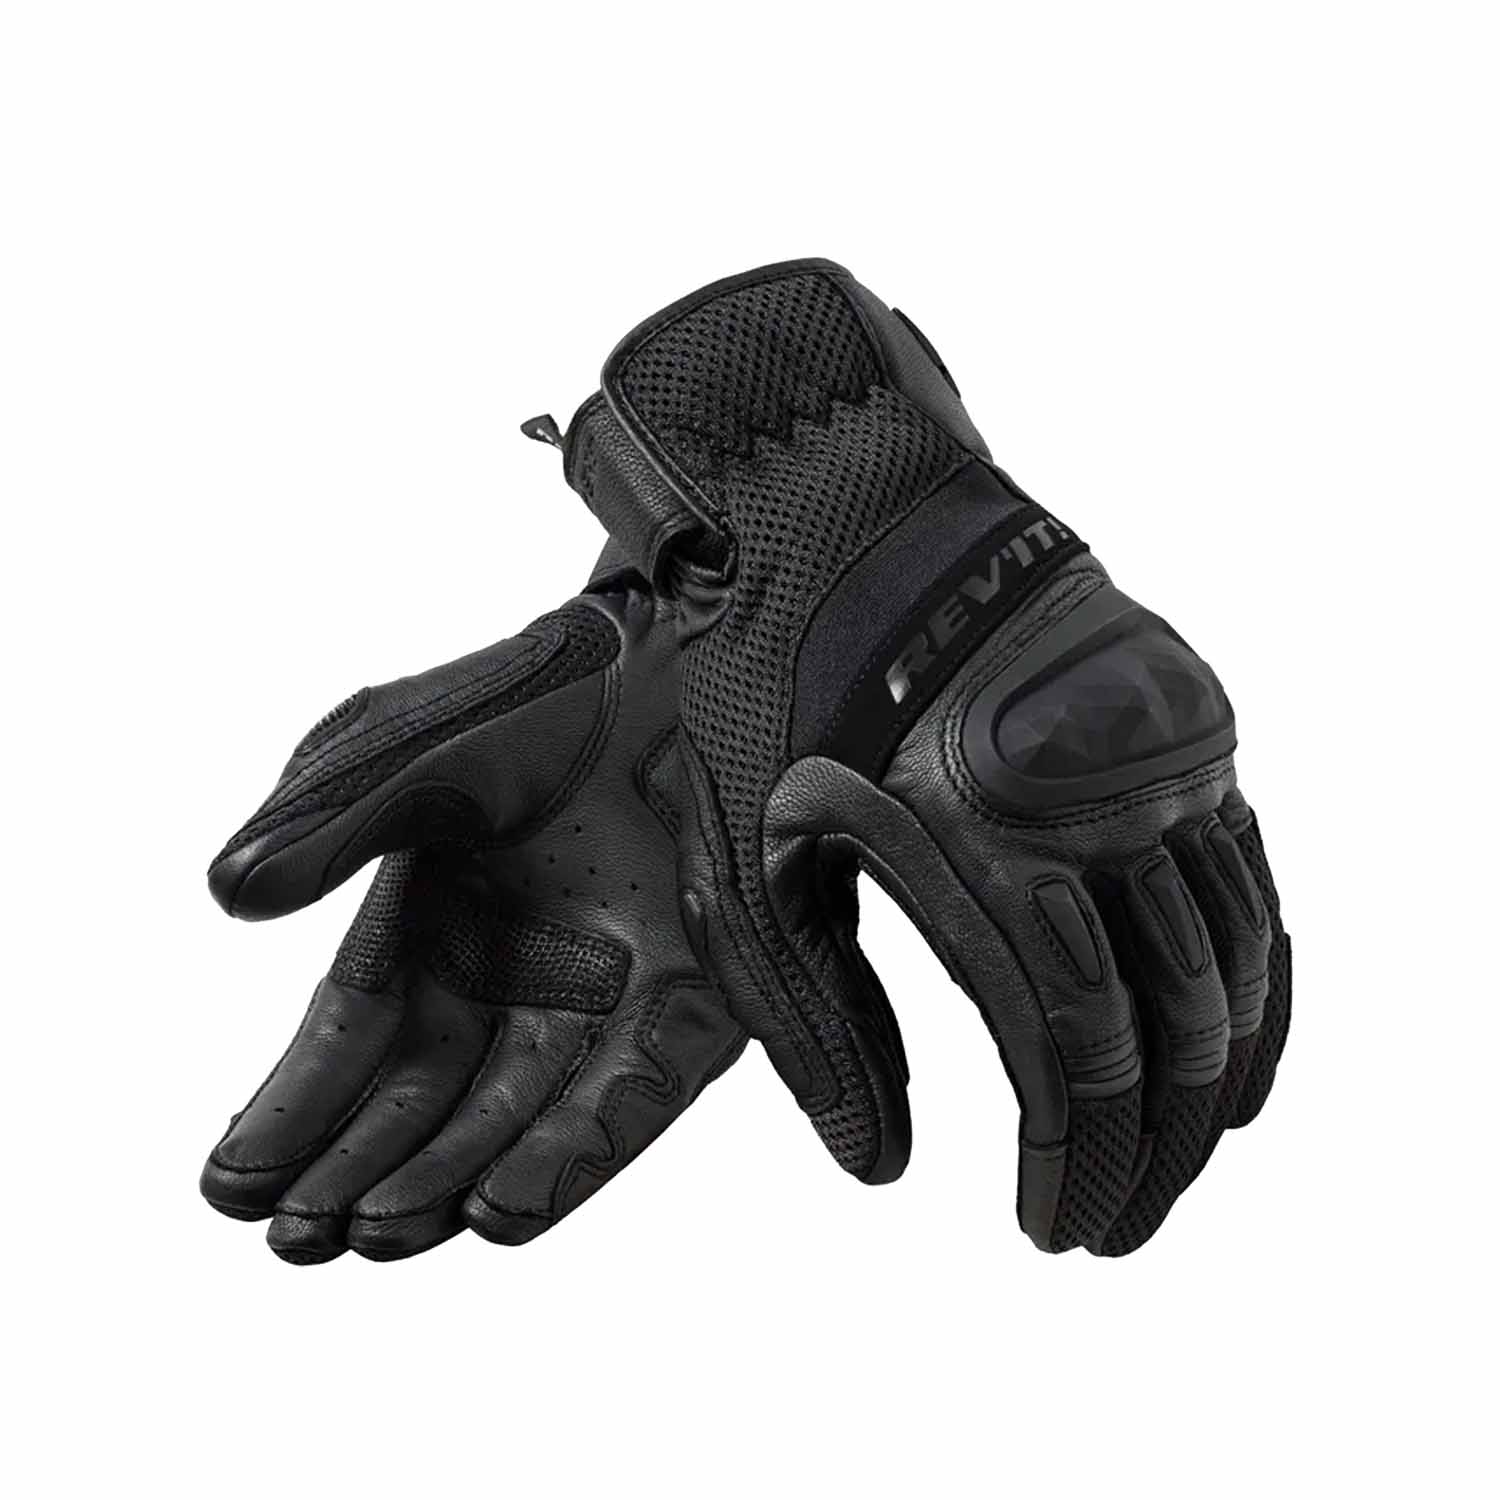 Image of REV'IT! Dirt 4 Gloves Black Size XL ID 8700001383417